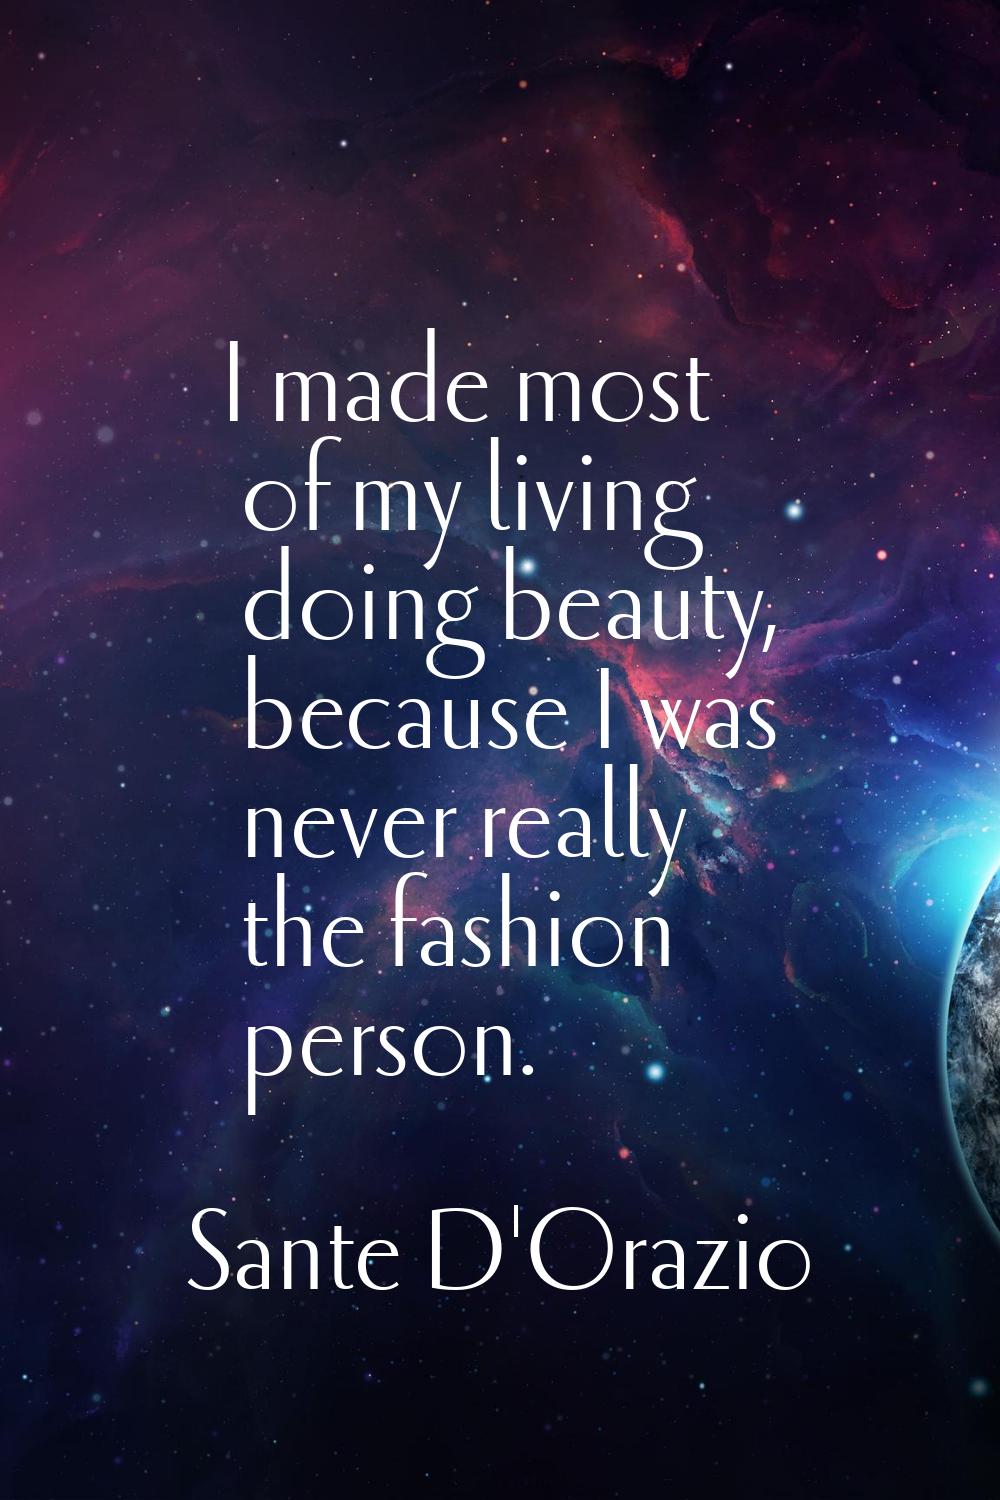 I made most of my living doing beauty, because I was never really the fashion person.